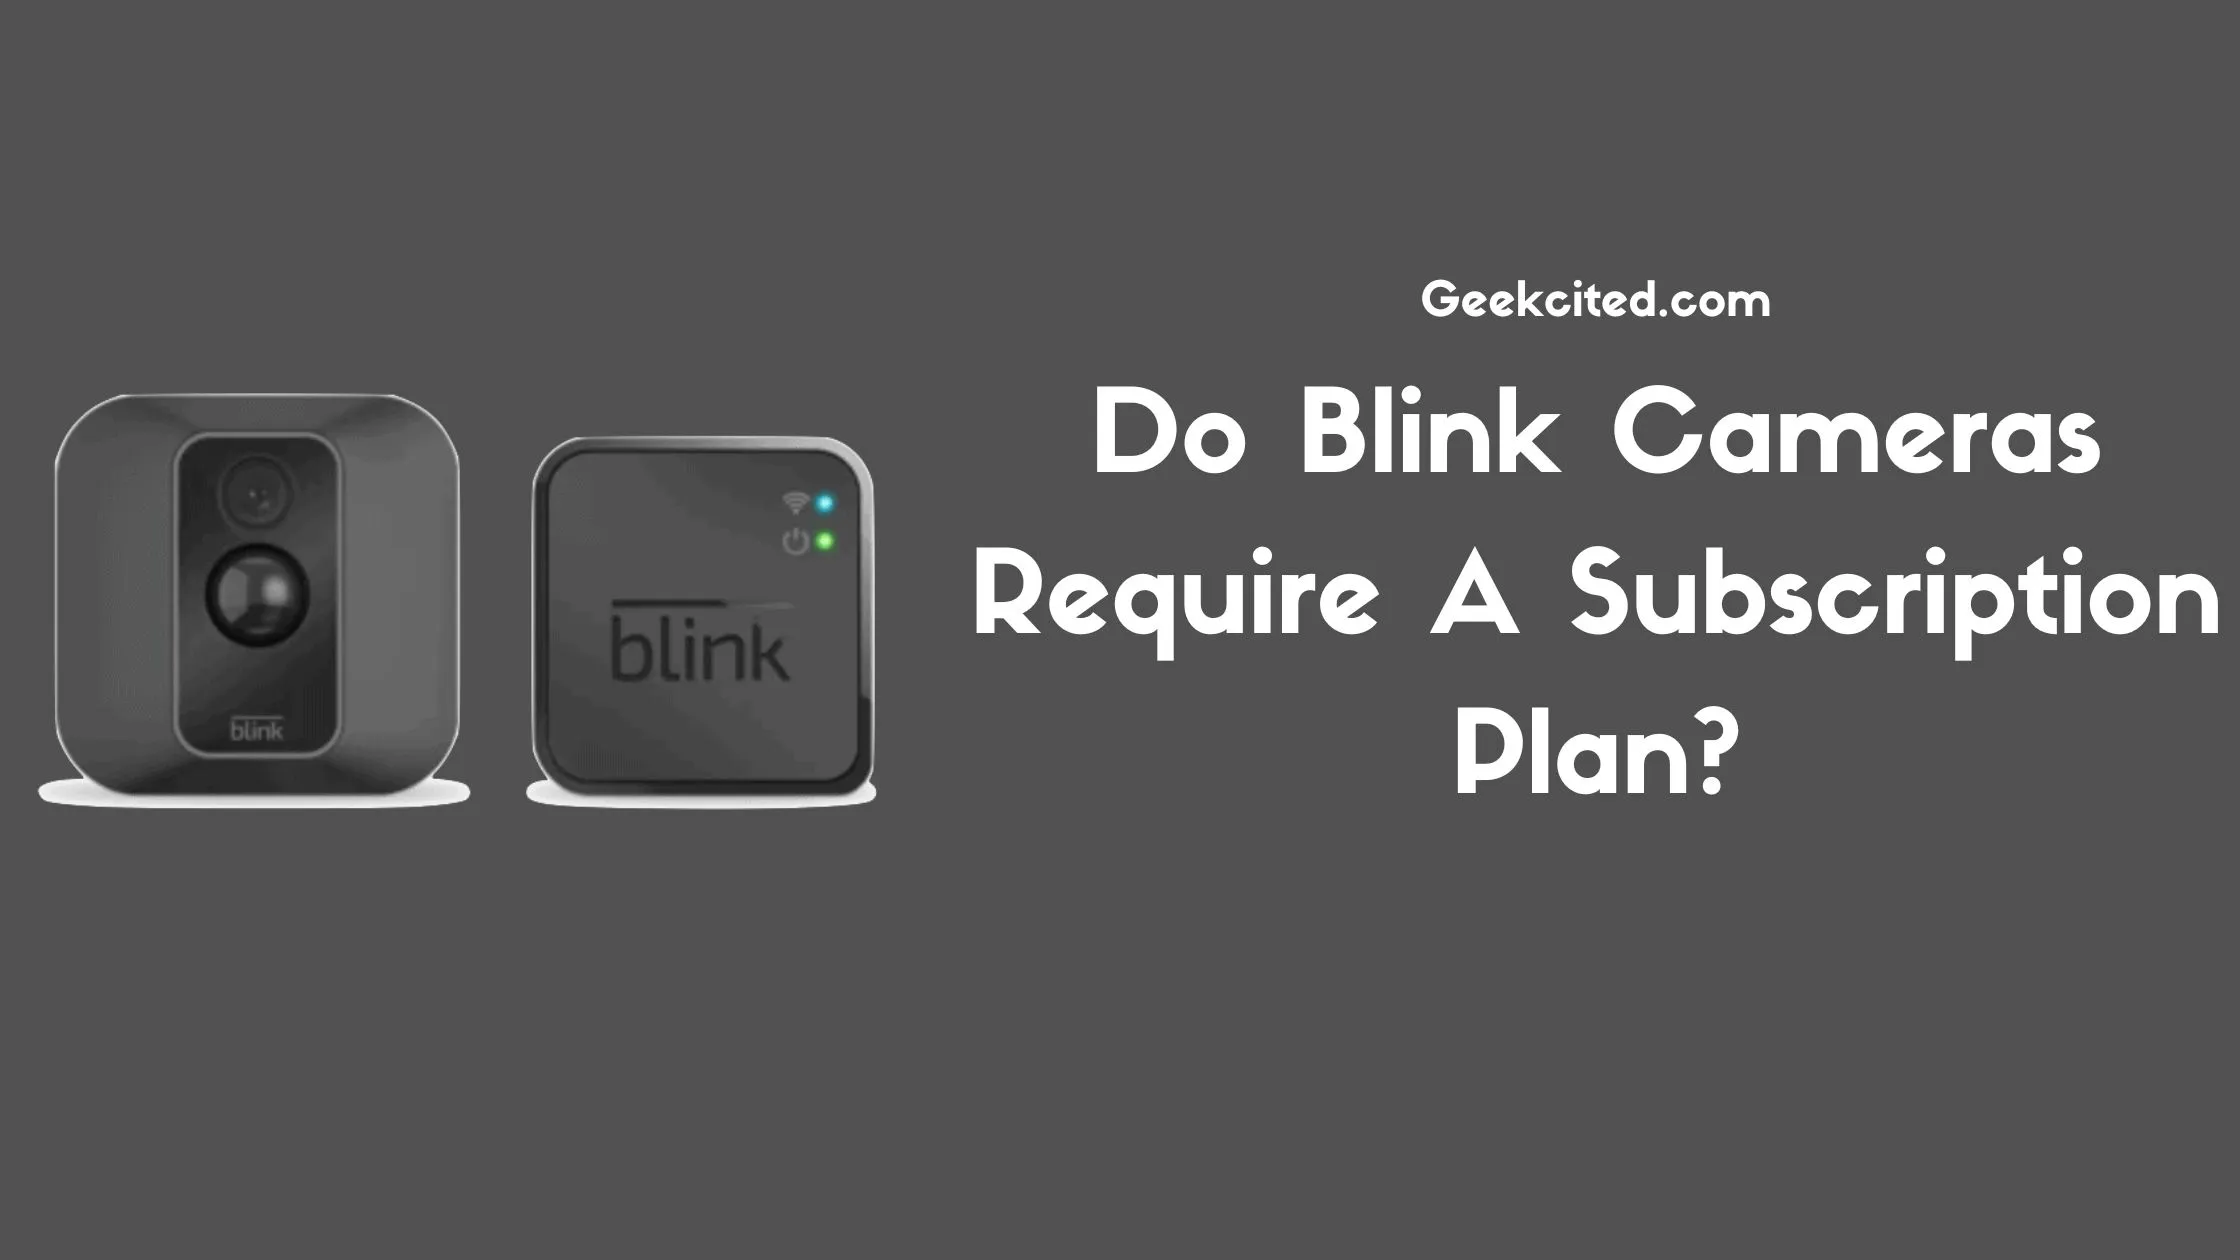 Do Blink Cameras Require A Subscription Plan